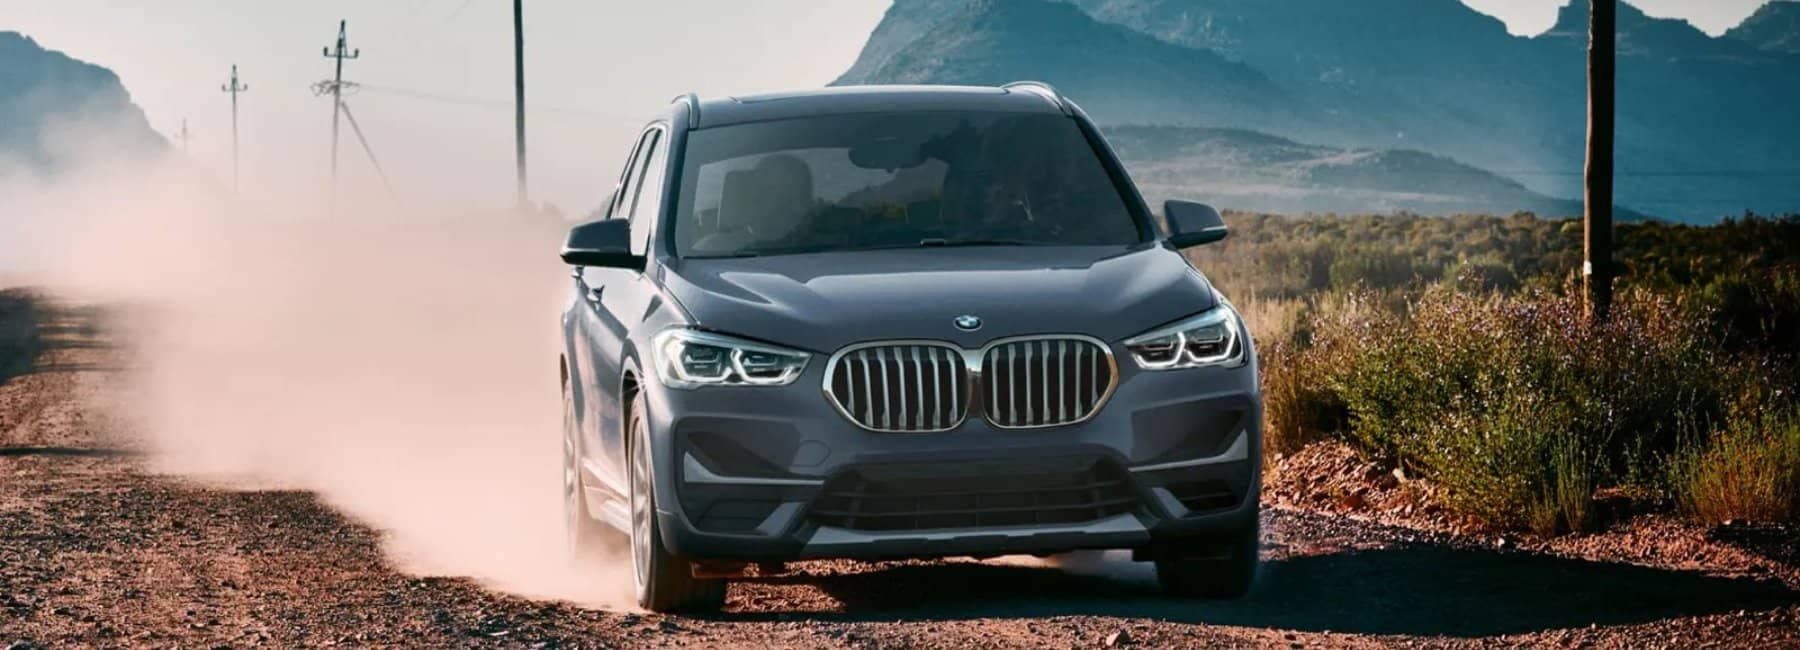 2022bmw-X1-dirtroad-frontview-grey